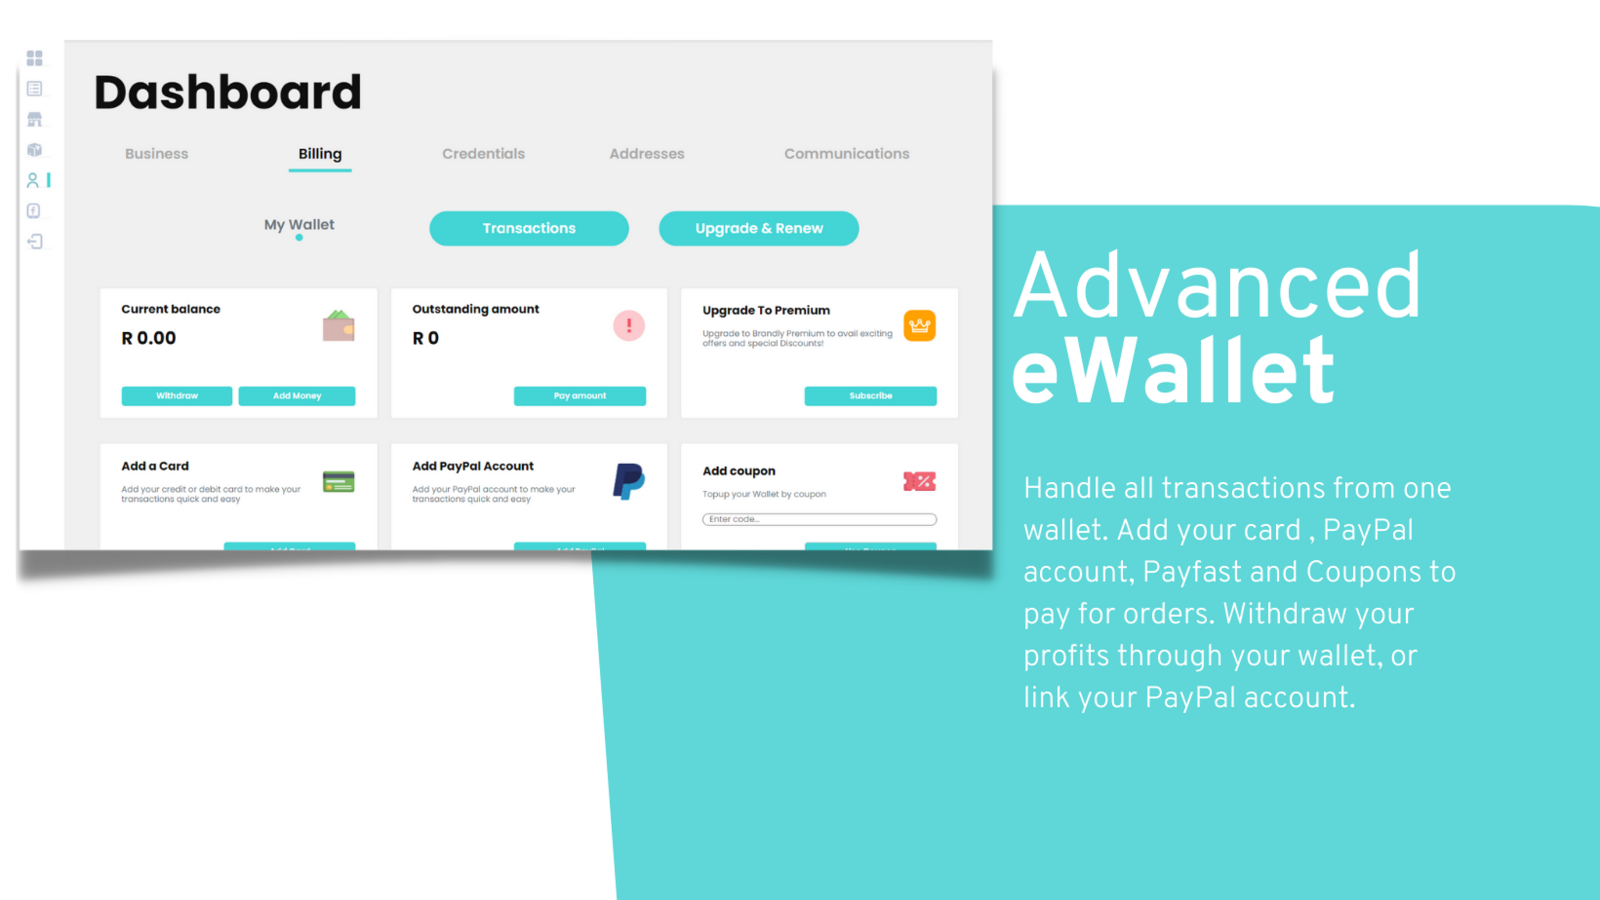 Advanced eWallet for Payments